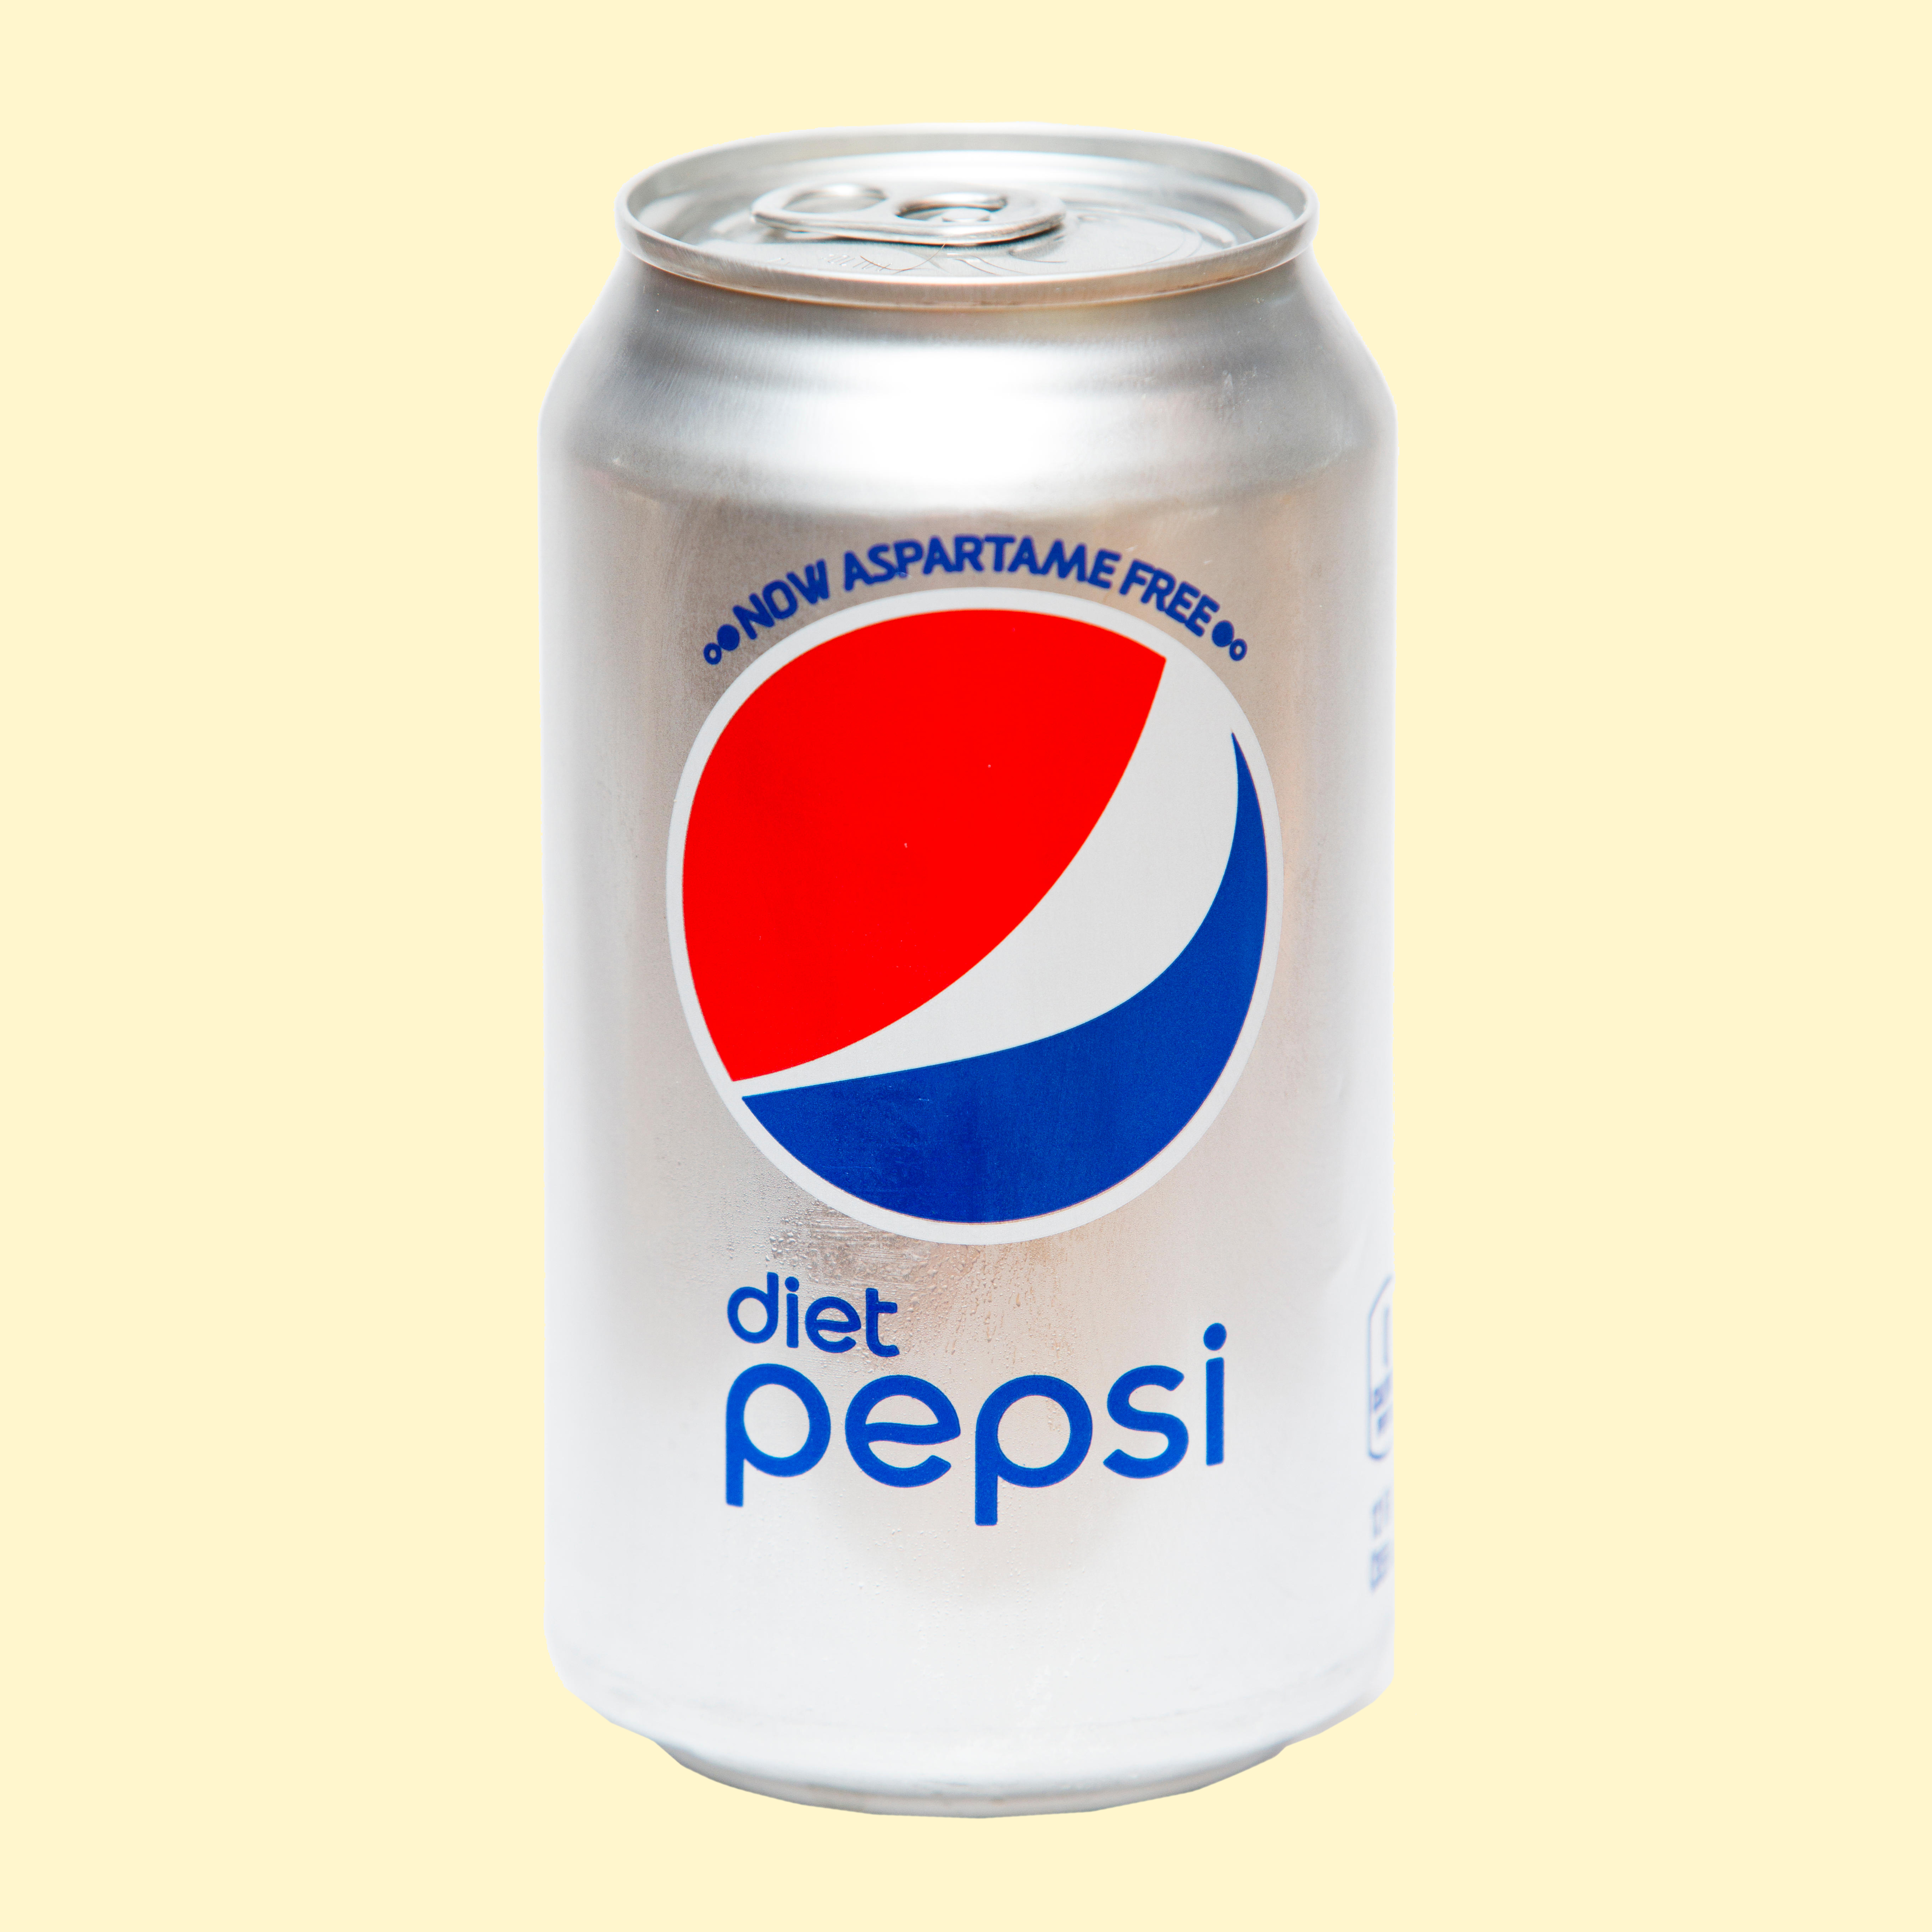 The new Diet Pepsi without Aspartame which has been replaced with Splenda